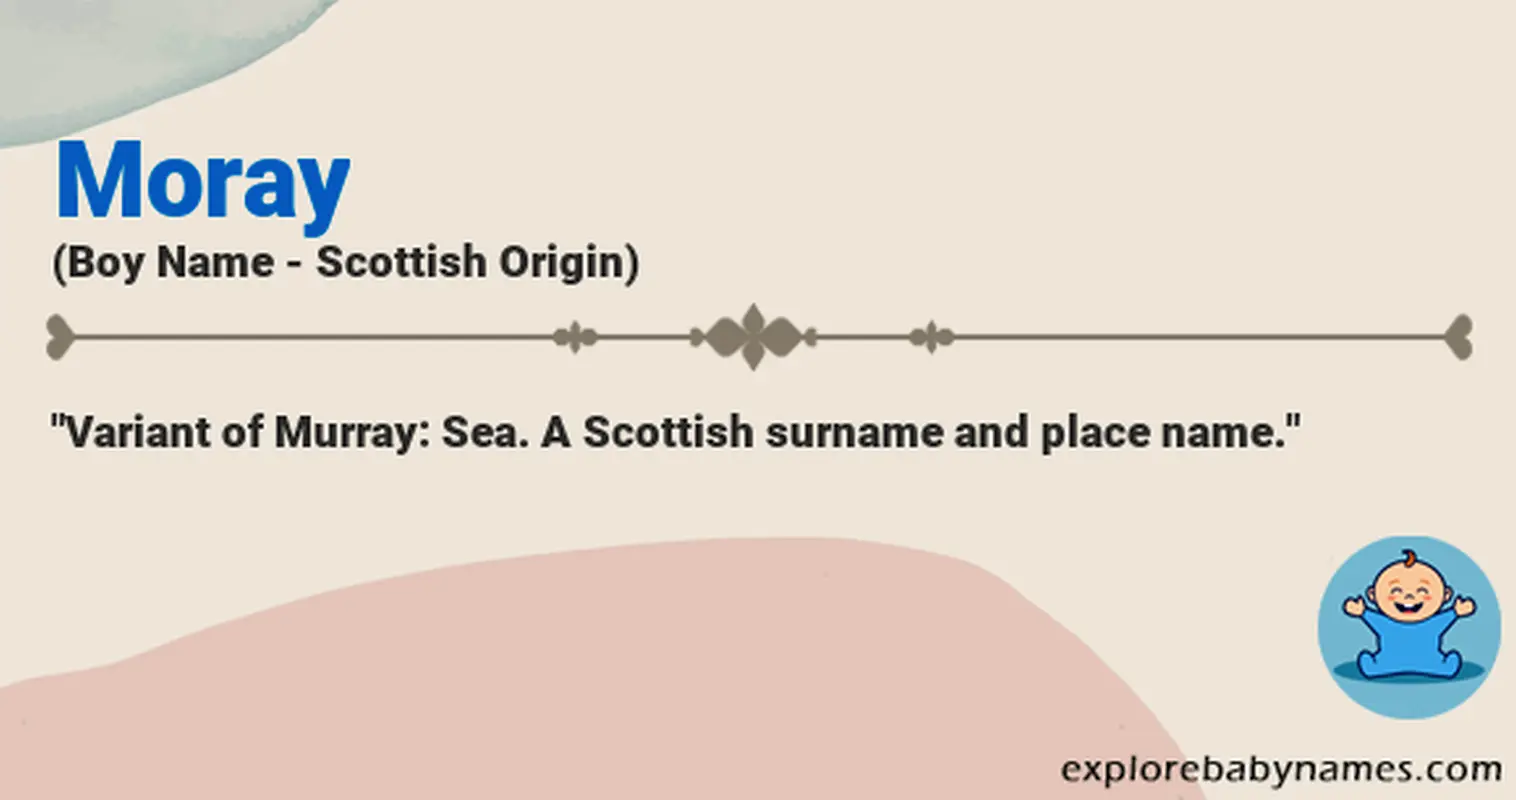 Meaning of Moray